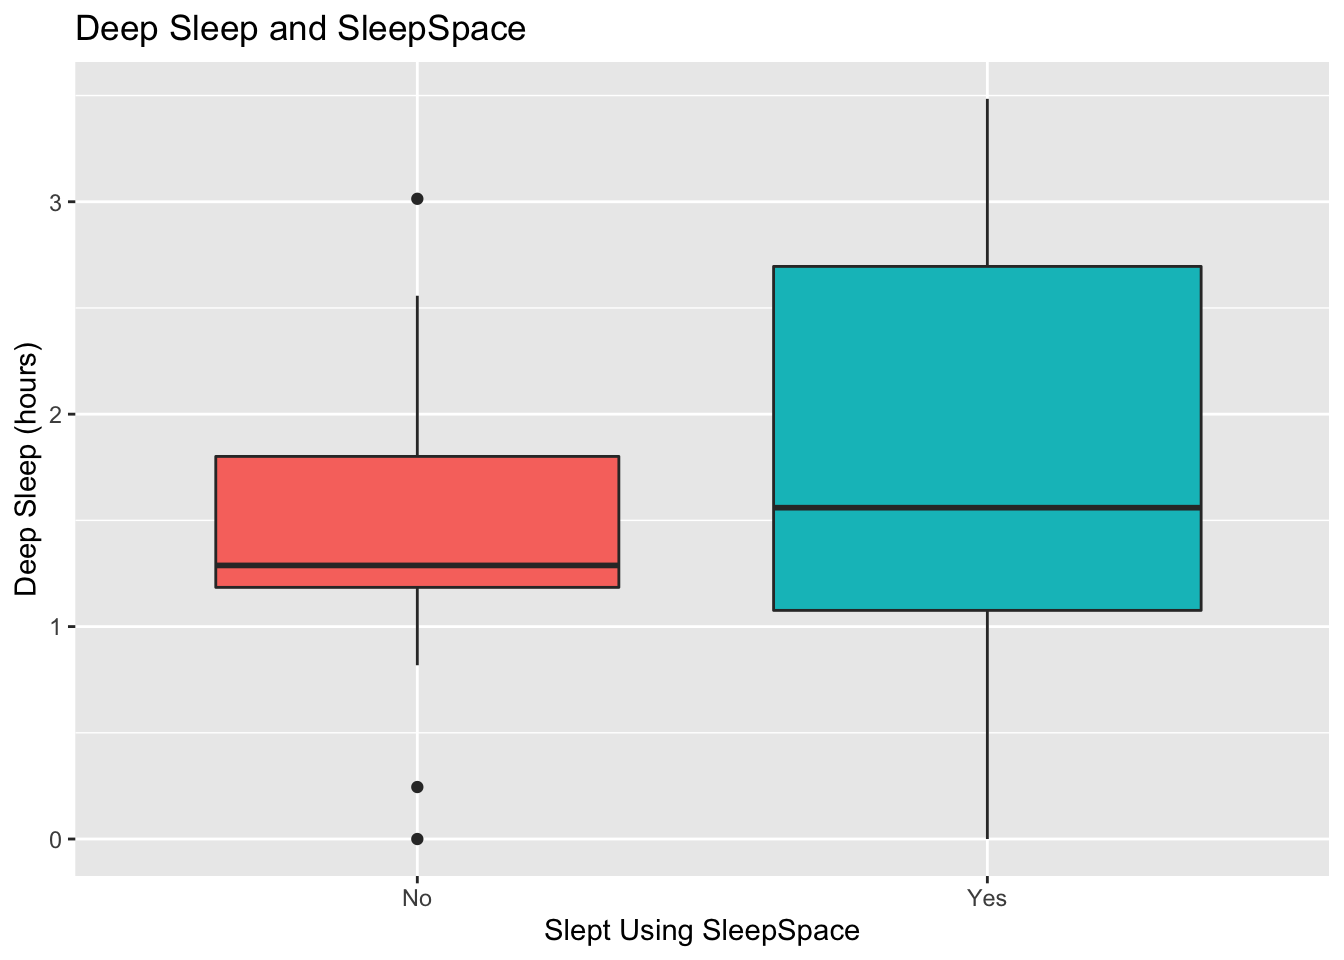 Overall amount of deep sleep appears to be better on nights when I use SS (SleepSpace)